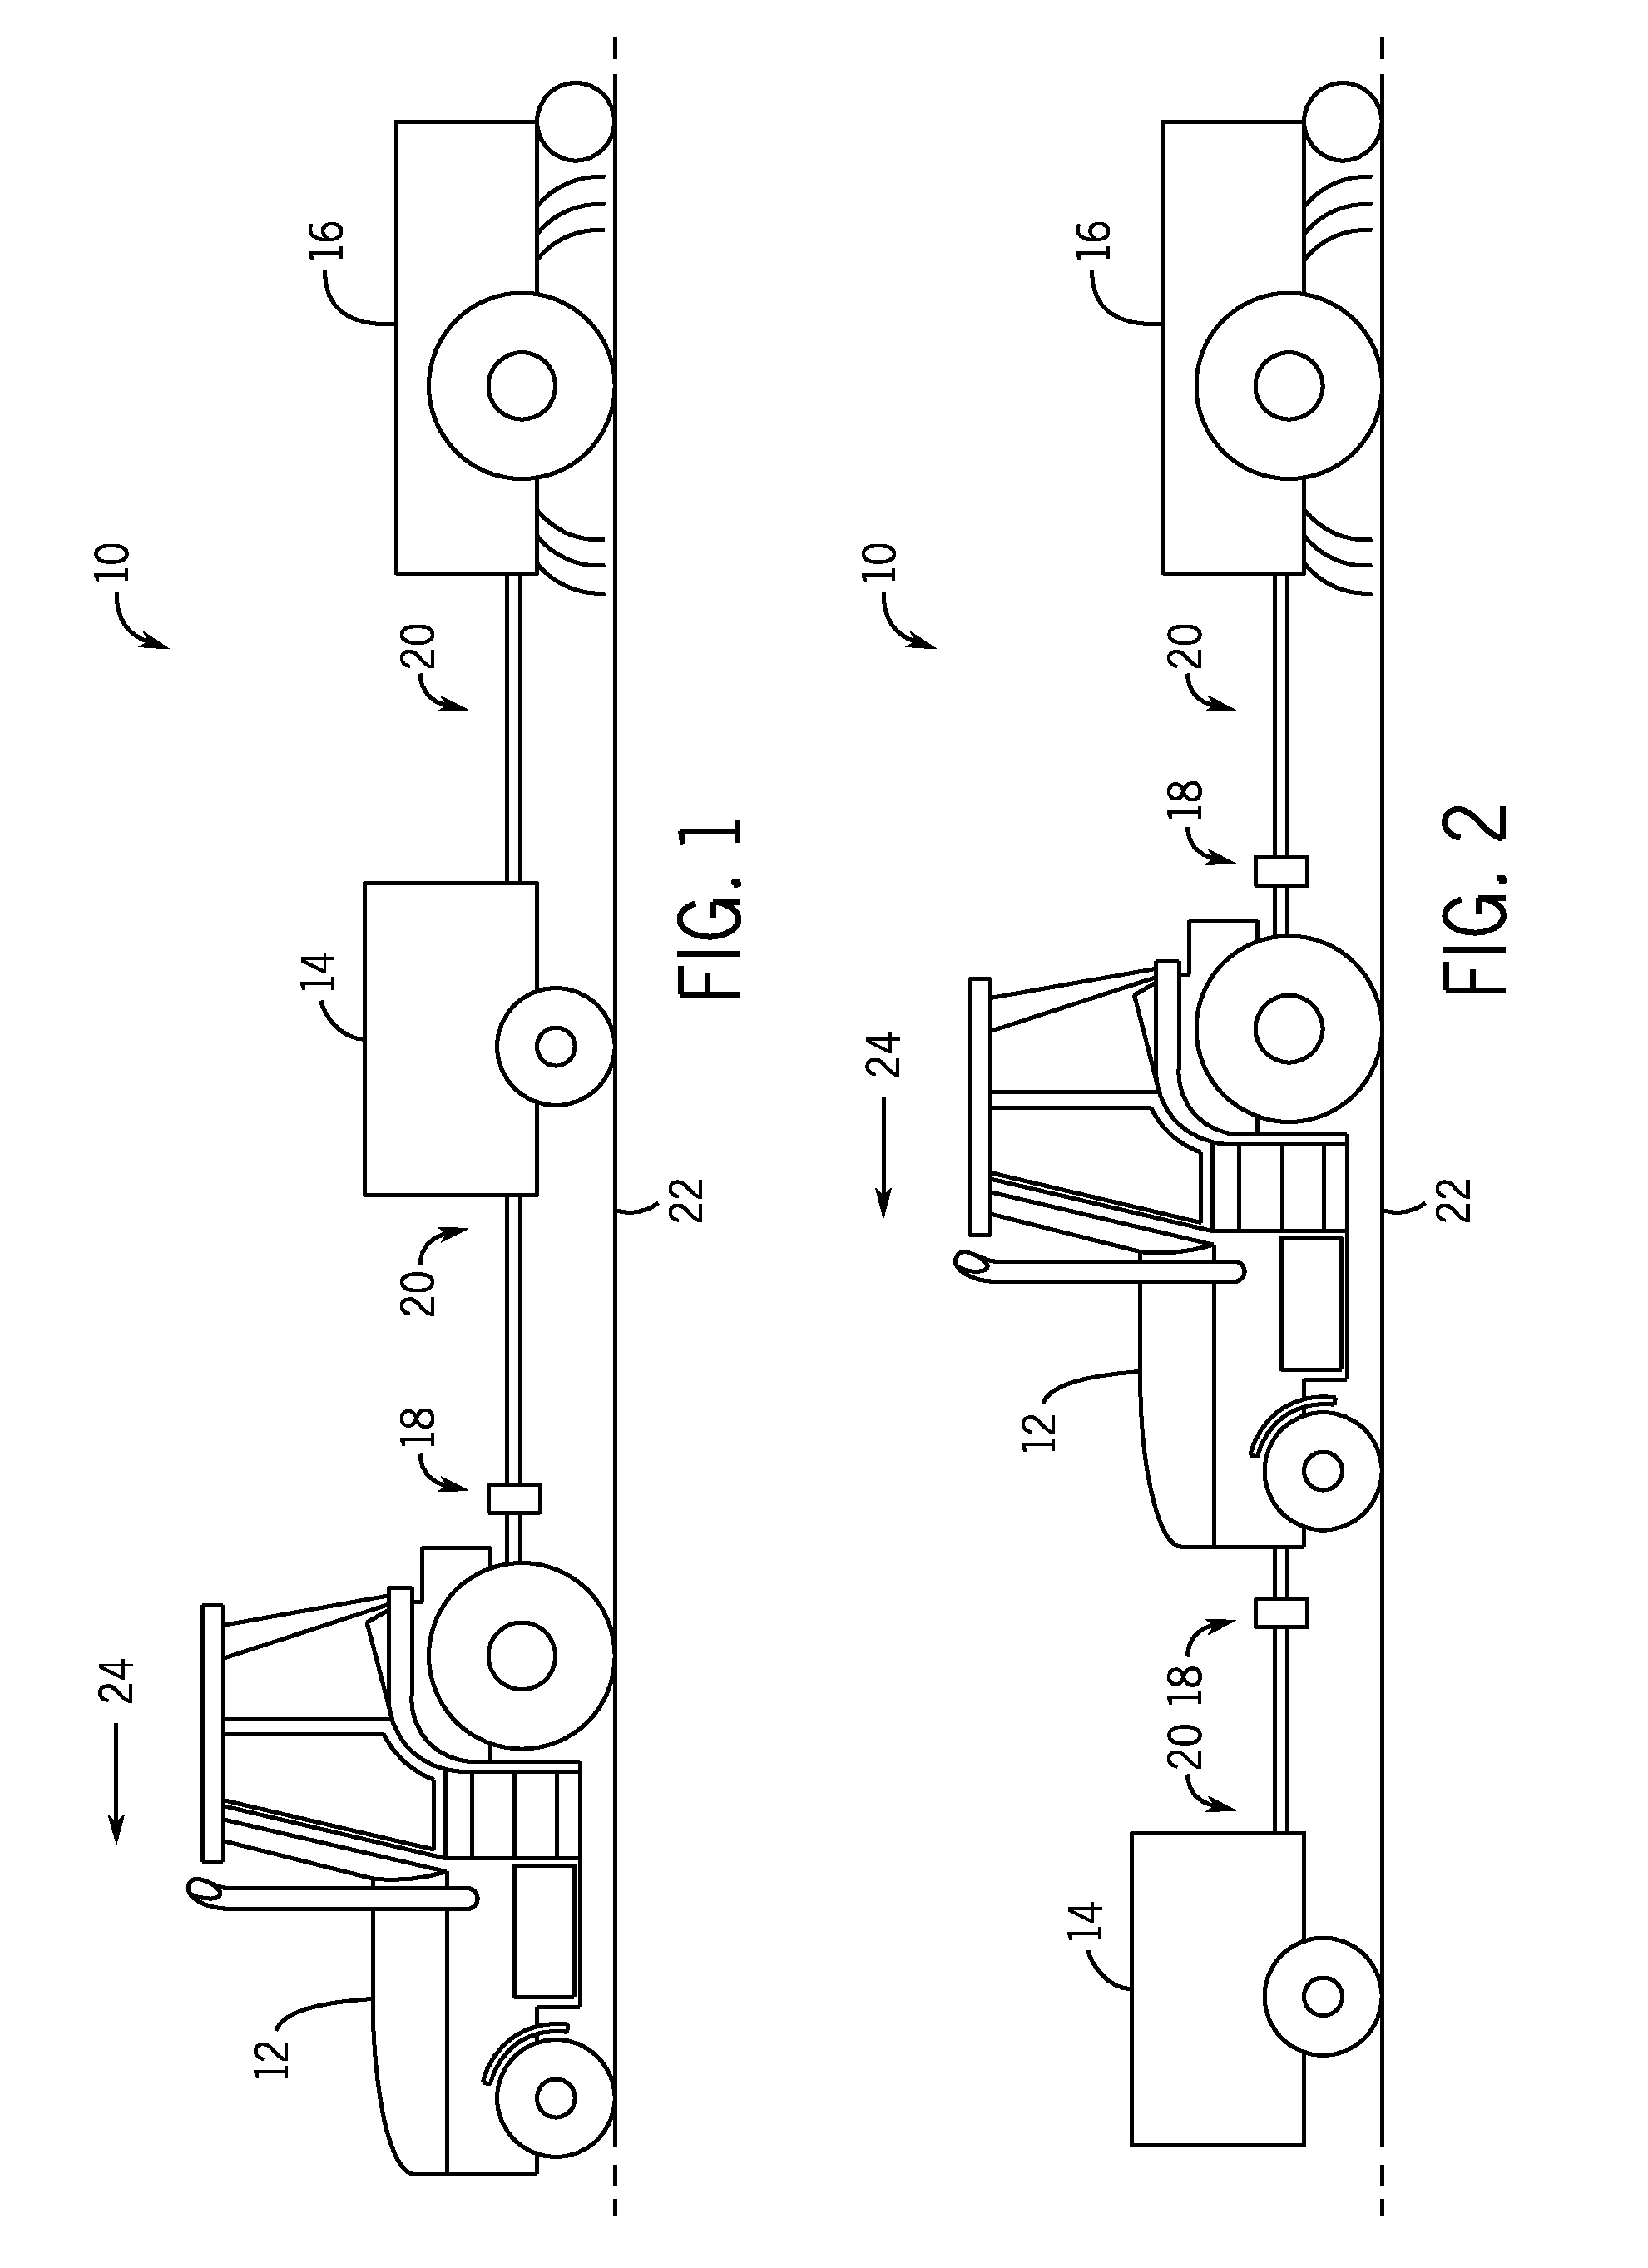 System and method for controlling an agricultural system based on soil analysis